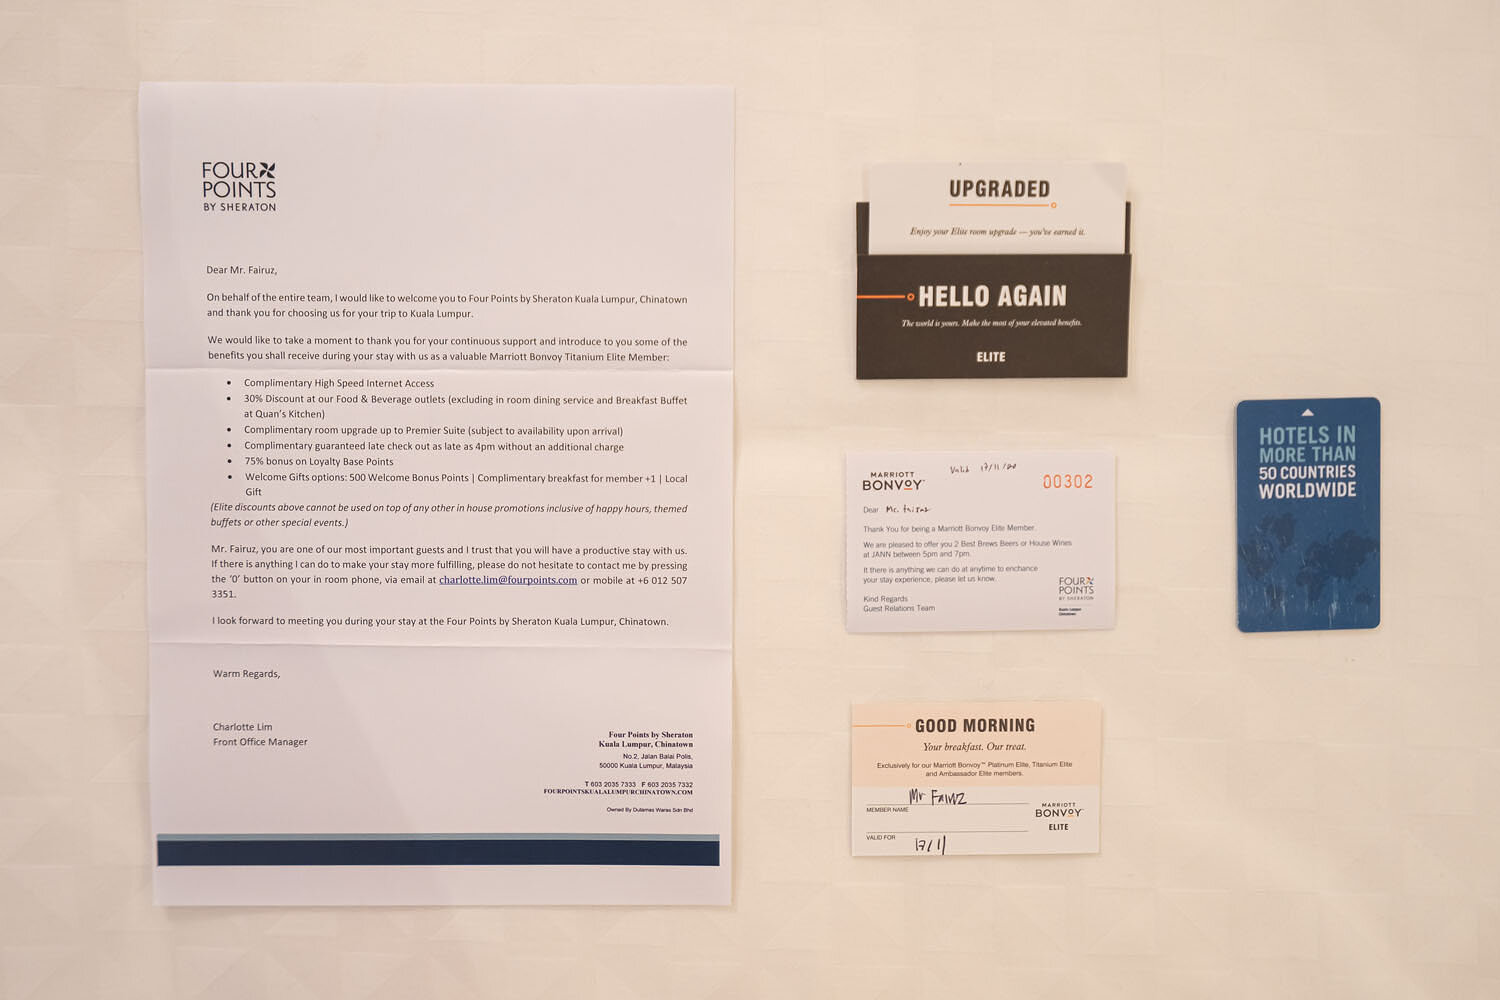  Welcome letter and drink vouchers 